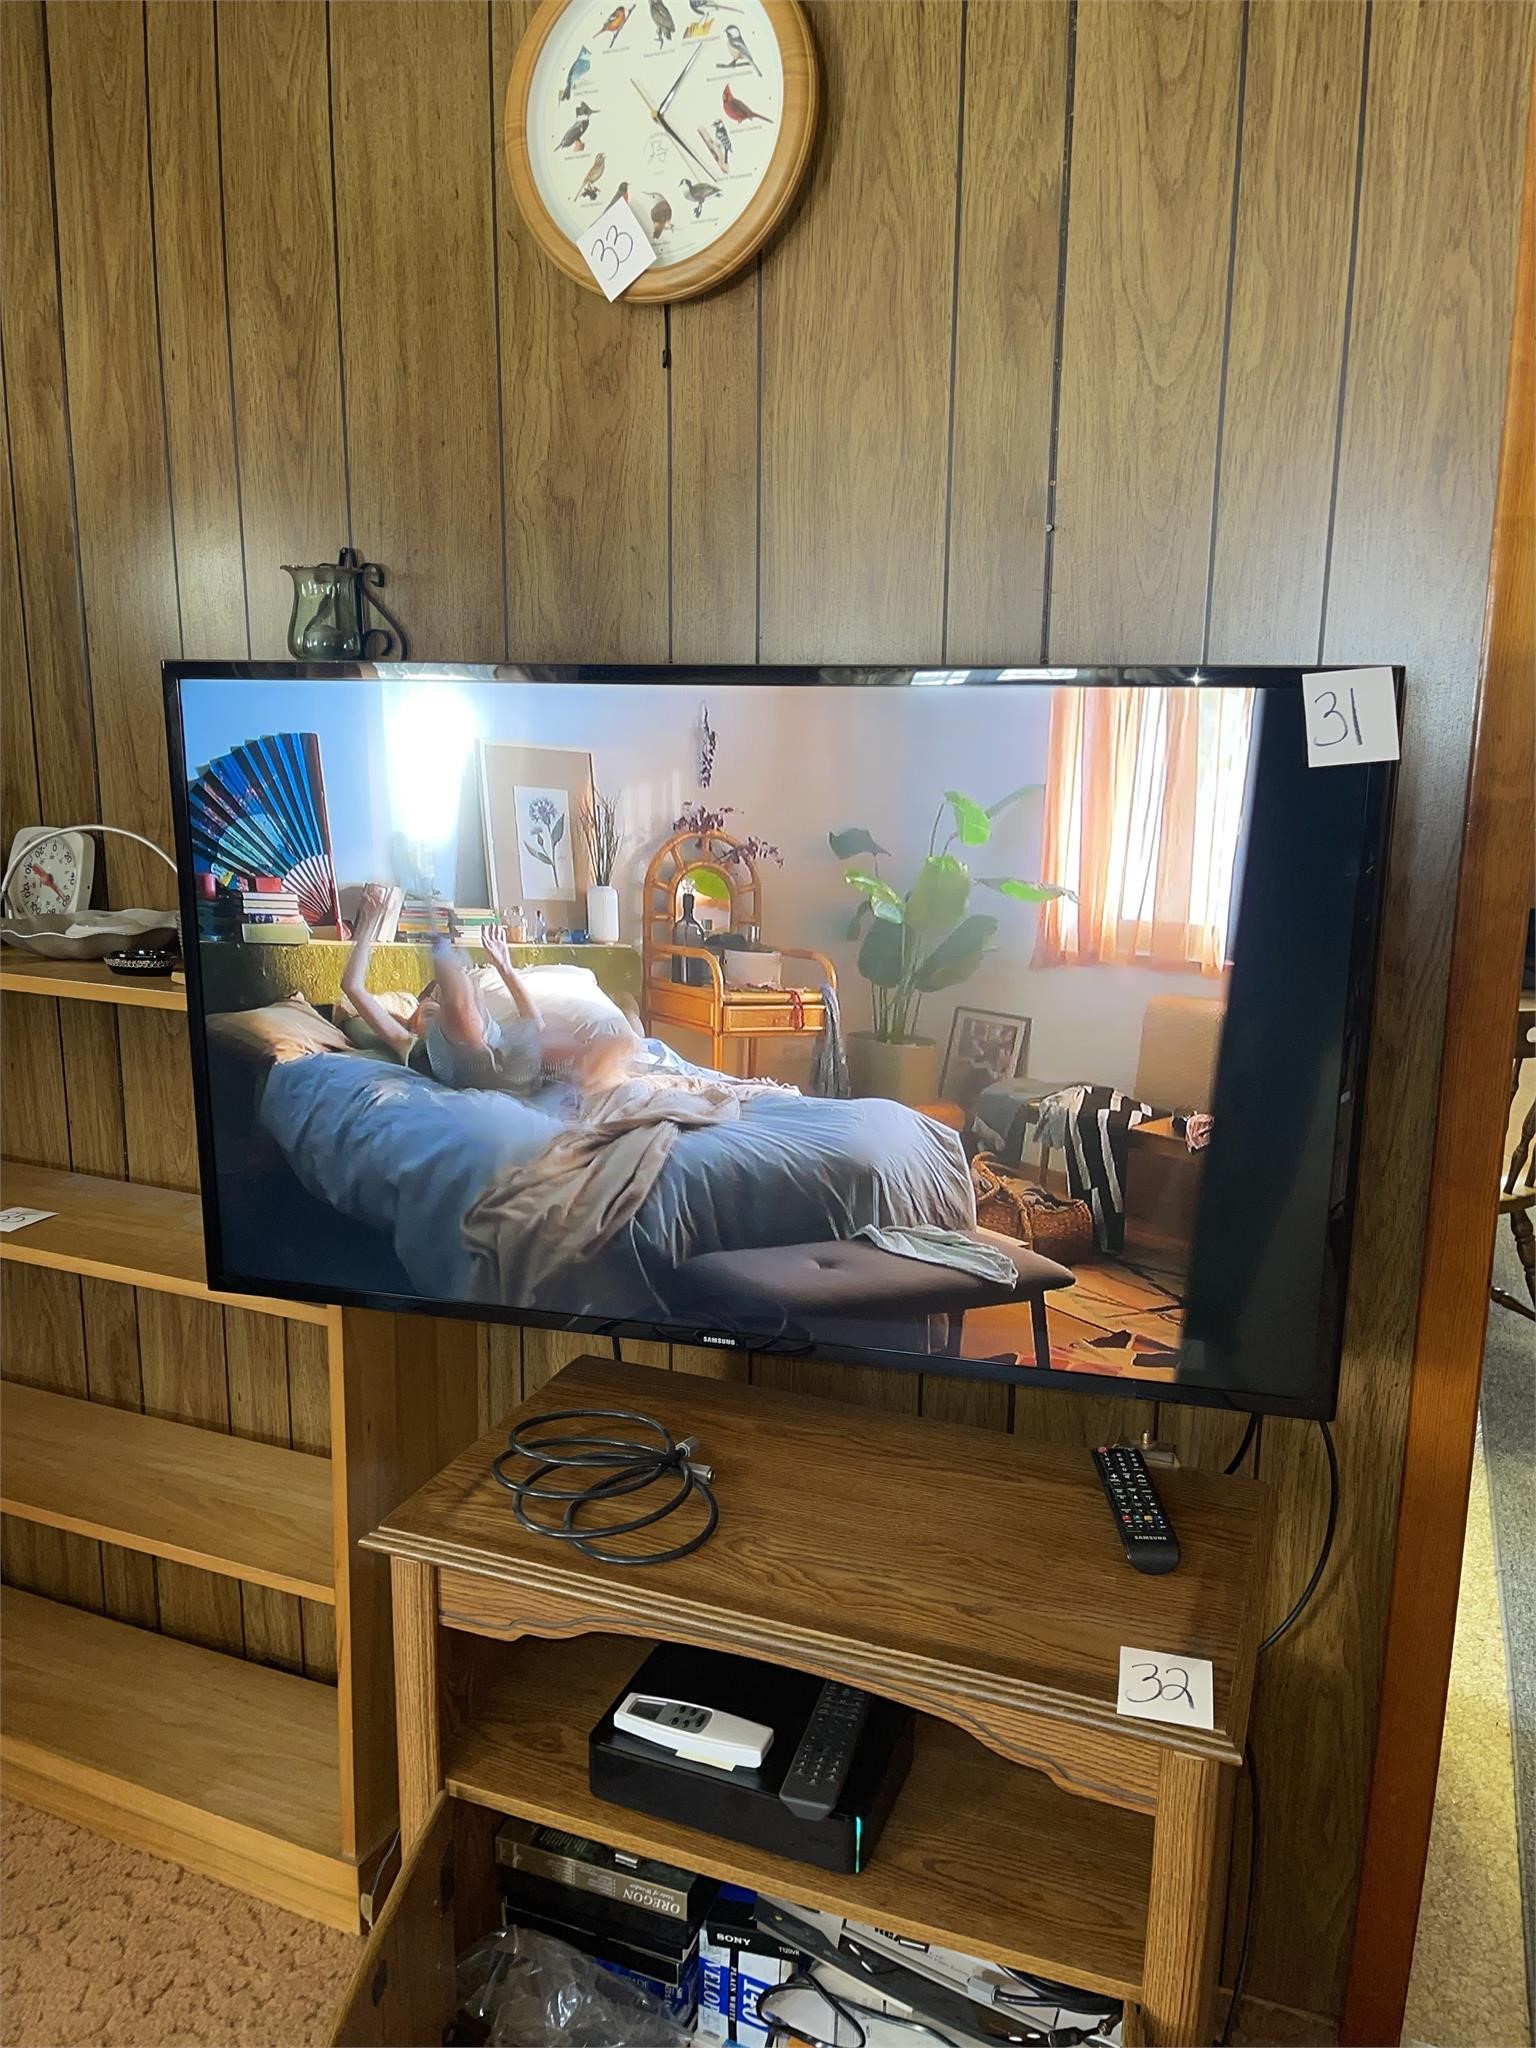 48” tv Samsung with remote and wall mount